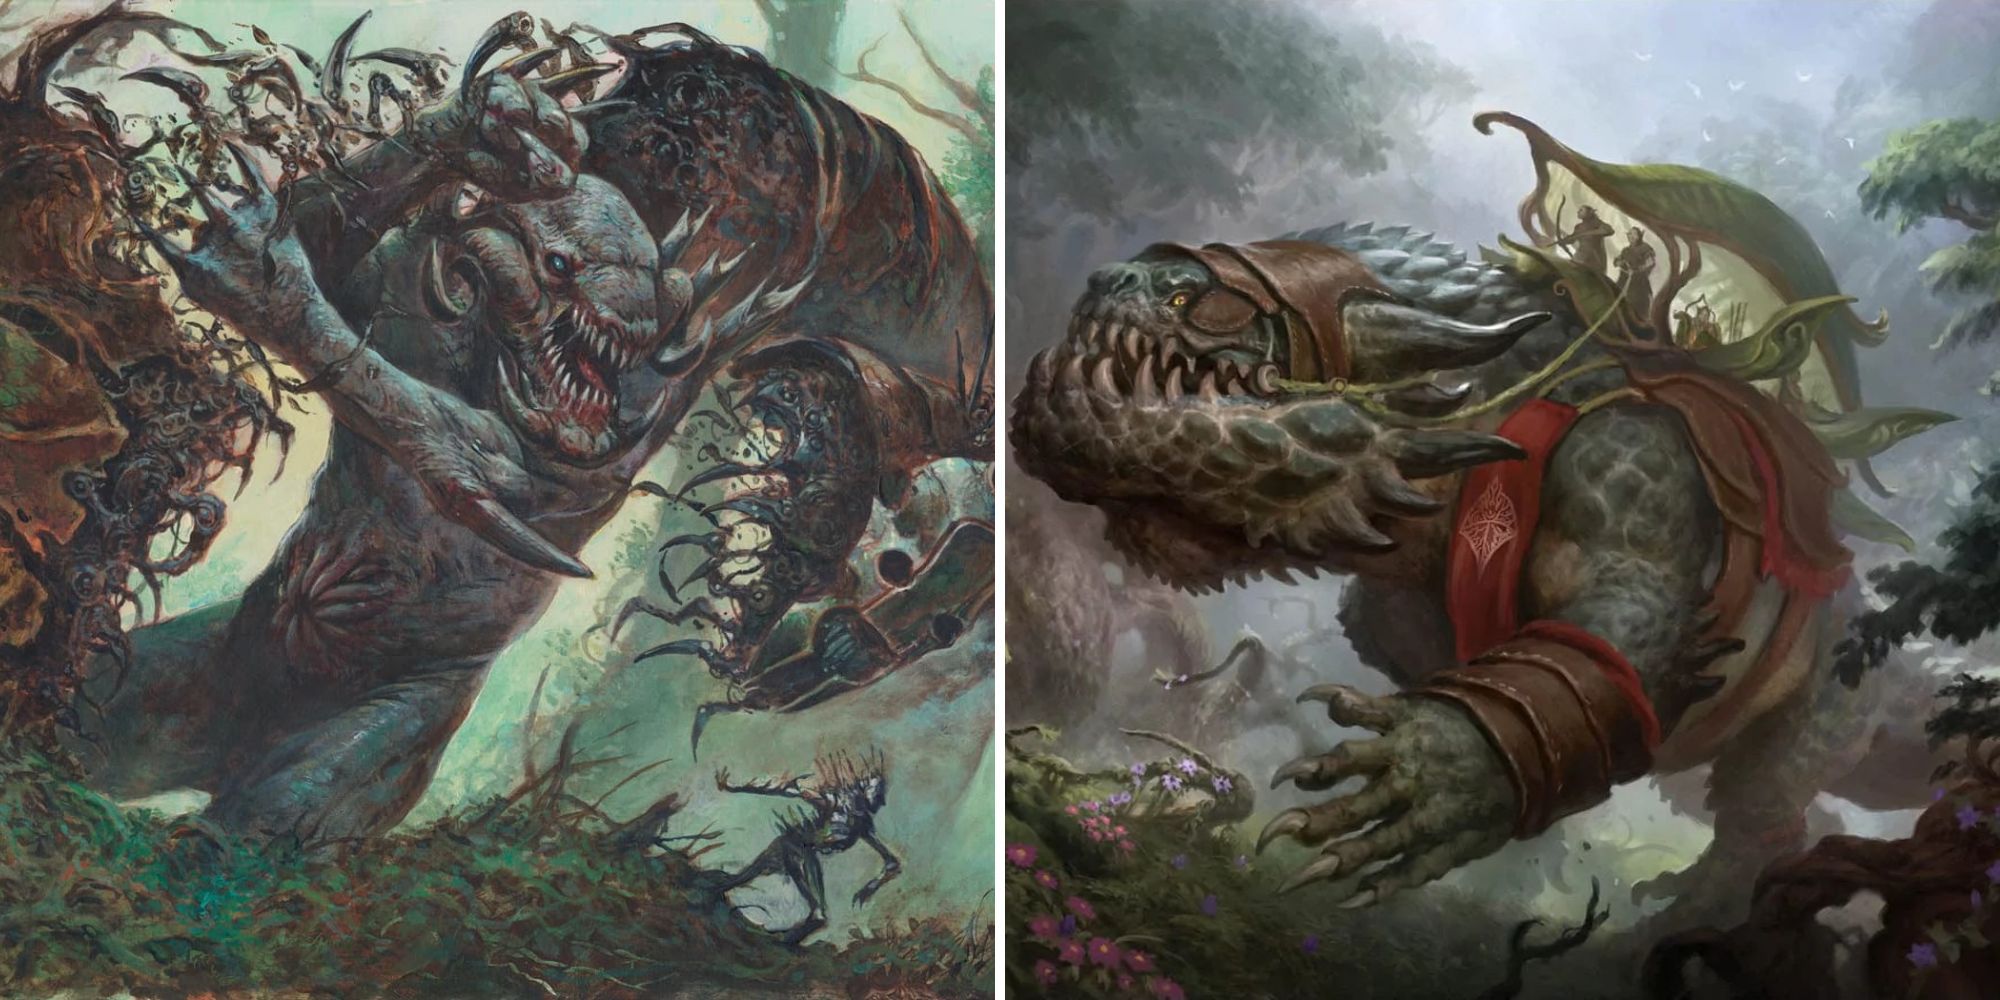 Two D&D monsters attacking beasts